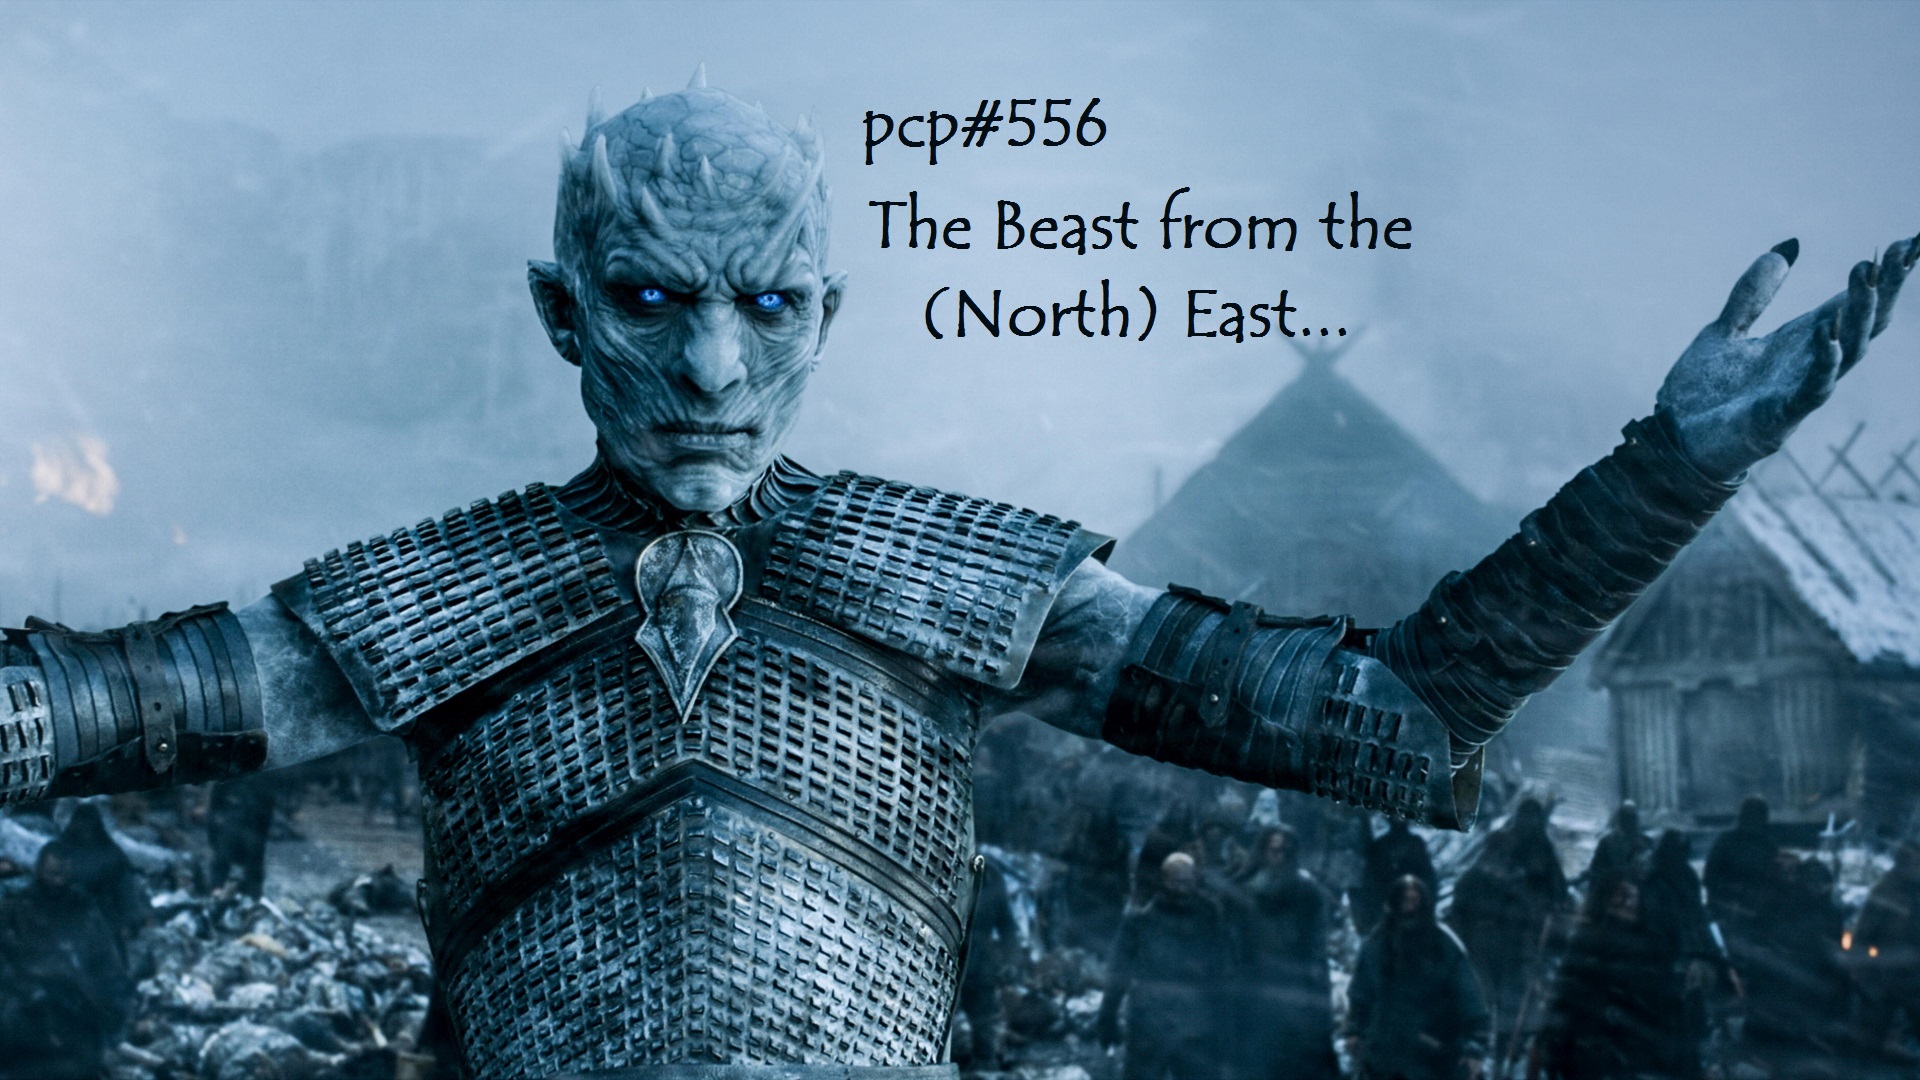 PCP#556... The Beast from the (North) East...